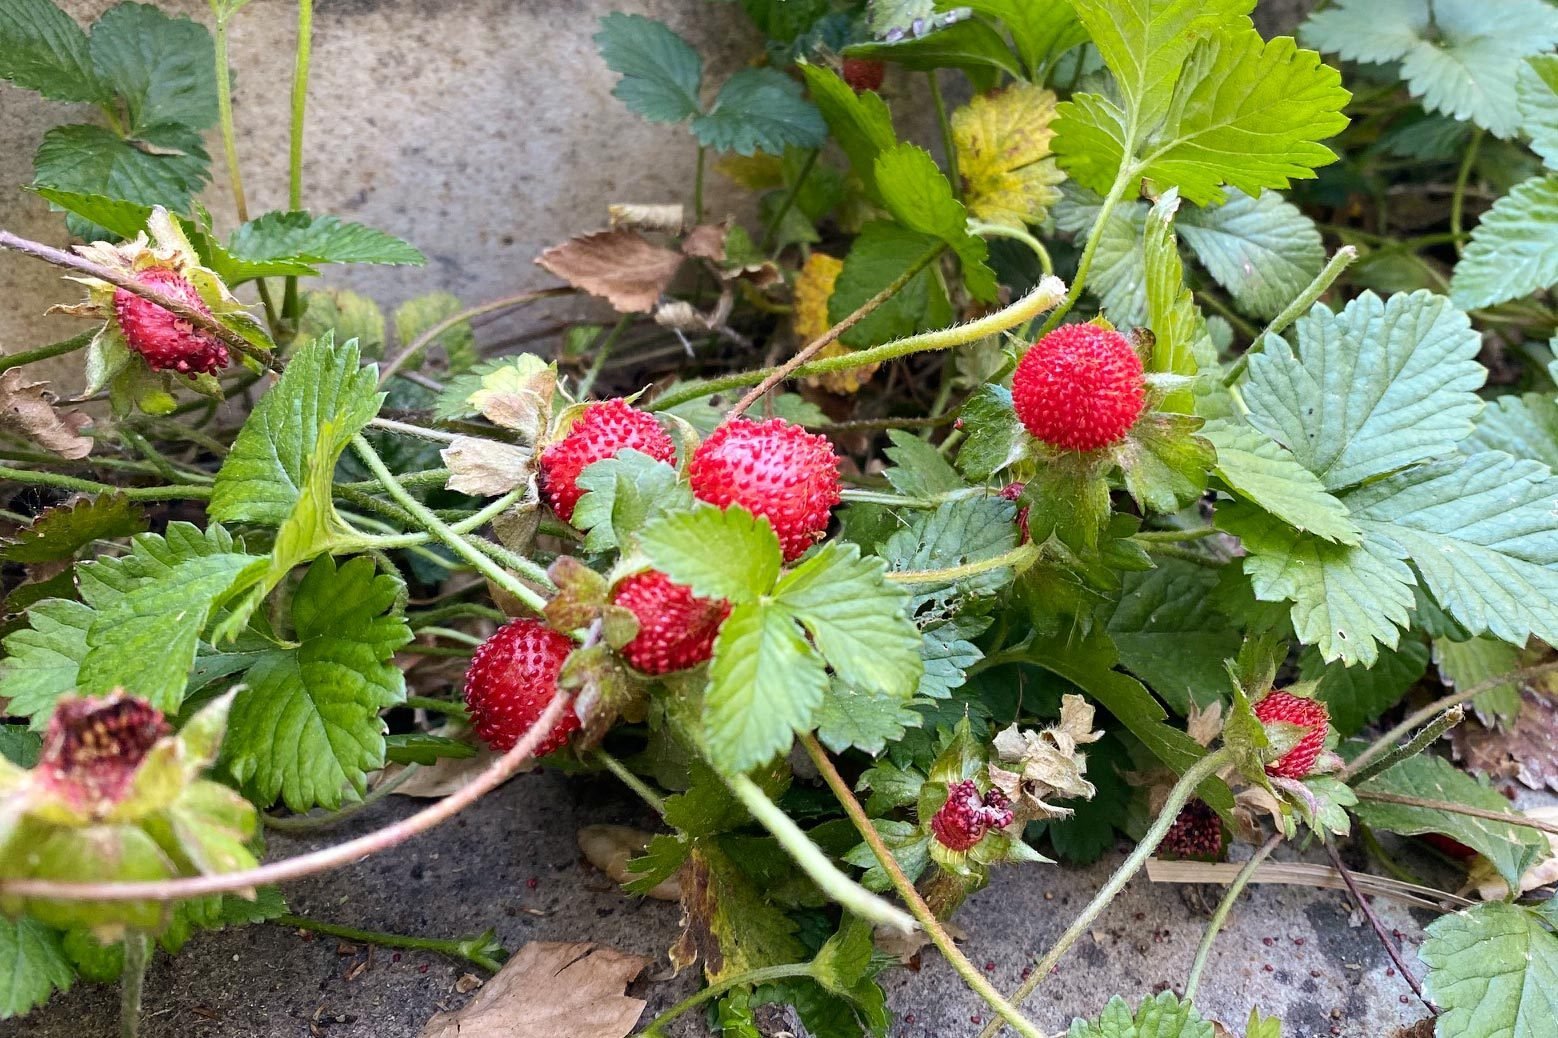 People Are Finding These Fake Strawberries on Their Lawn—Here's What They Really Are